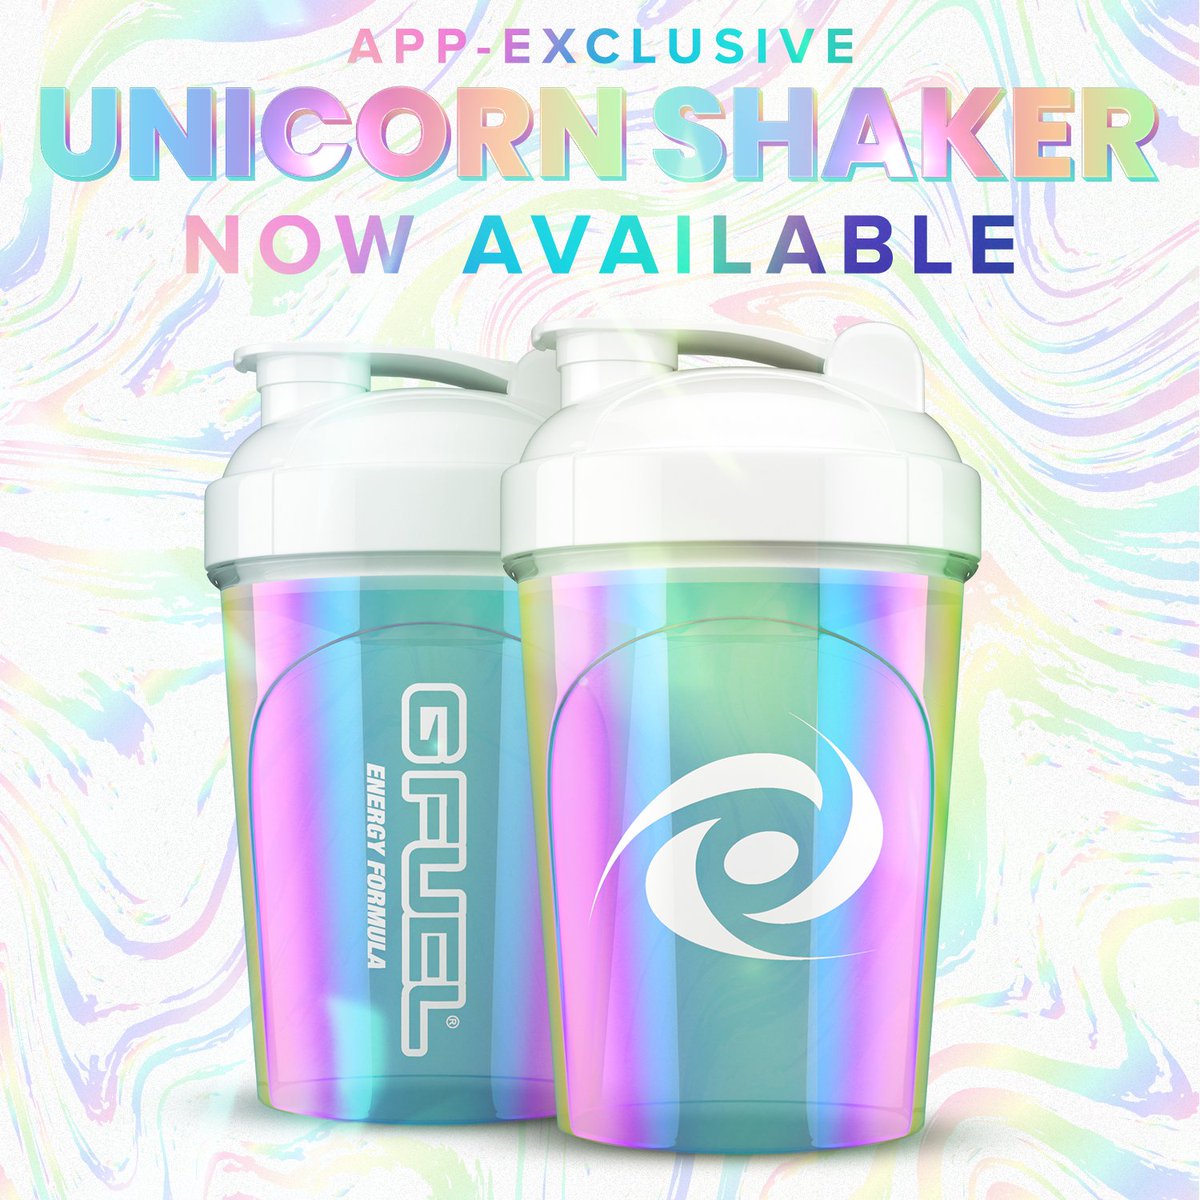 G FUEL® on X: 💜 𝗥𝗧 + 𝗖𝗢𝗠𝗠𝗘𝗡𝗧 🦄  to win a #GFUEL APP EXCLUSIVE  UNICORN STARTER KIT!!! 🤩 Picking 2 winners on Monday to celebrate the  launch of these MAGNIFICENT